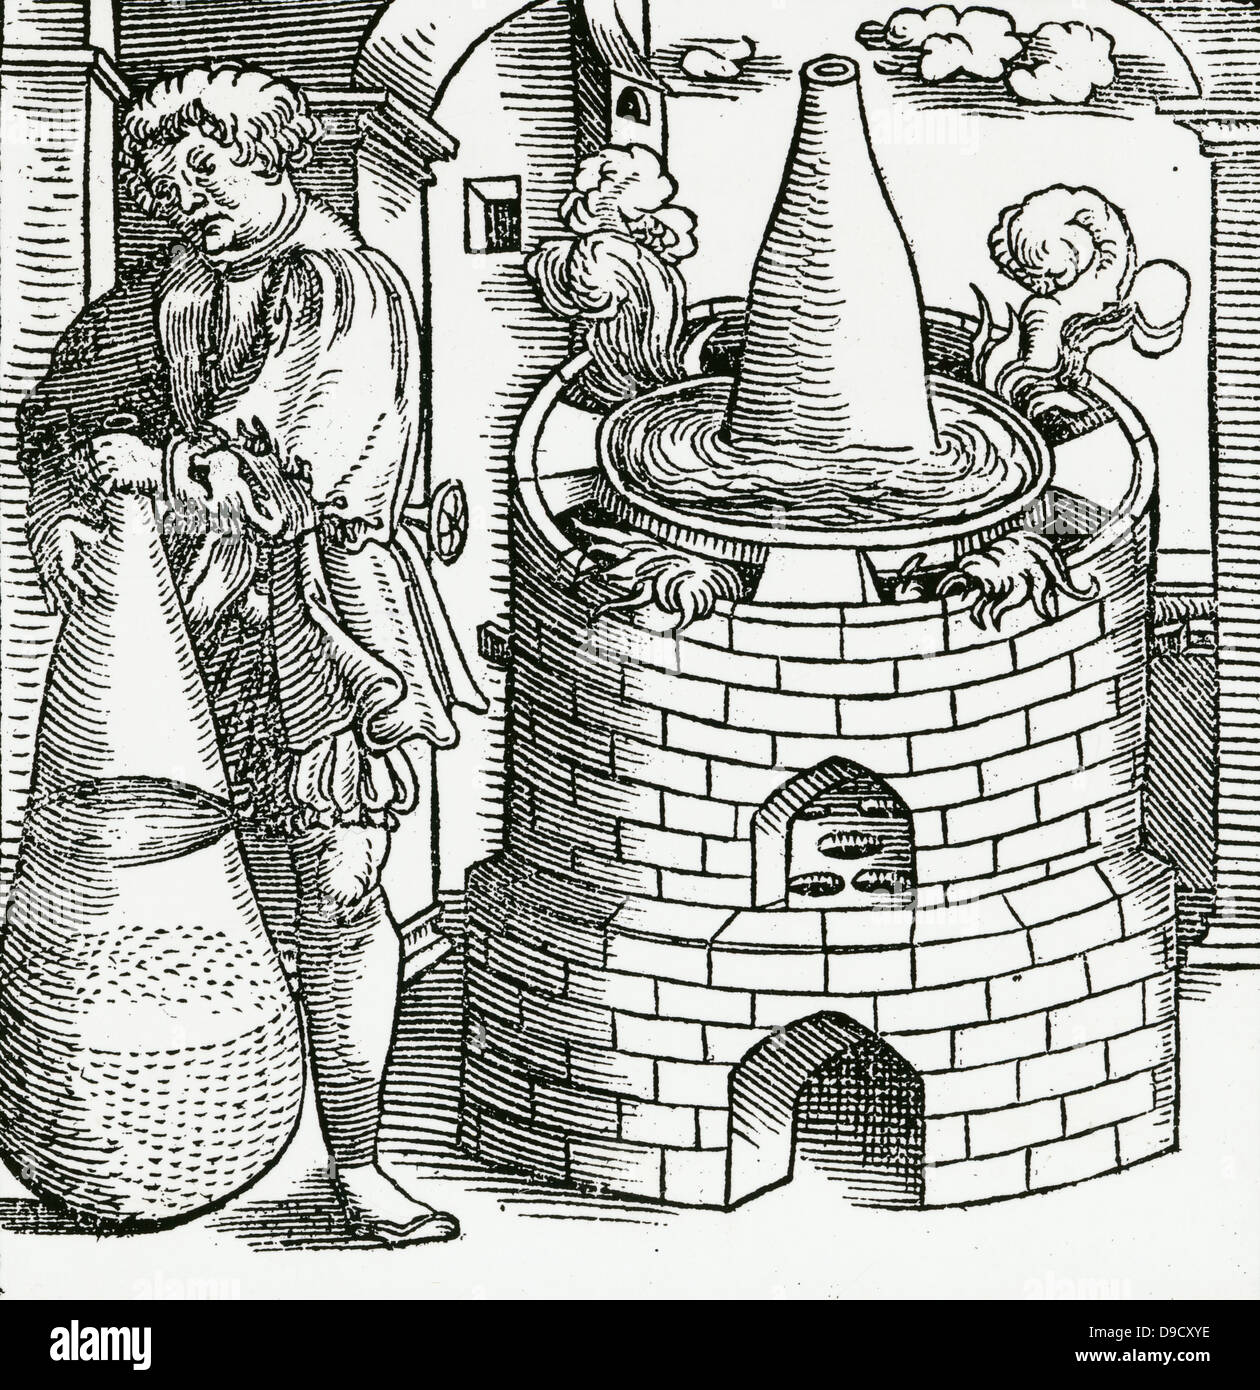 Athanor, a digesting furnace, with water bath and hermetic vase. From Alchemiae Gebri Arabis Libri, Bern, 1545. Stock Photo